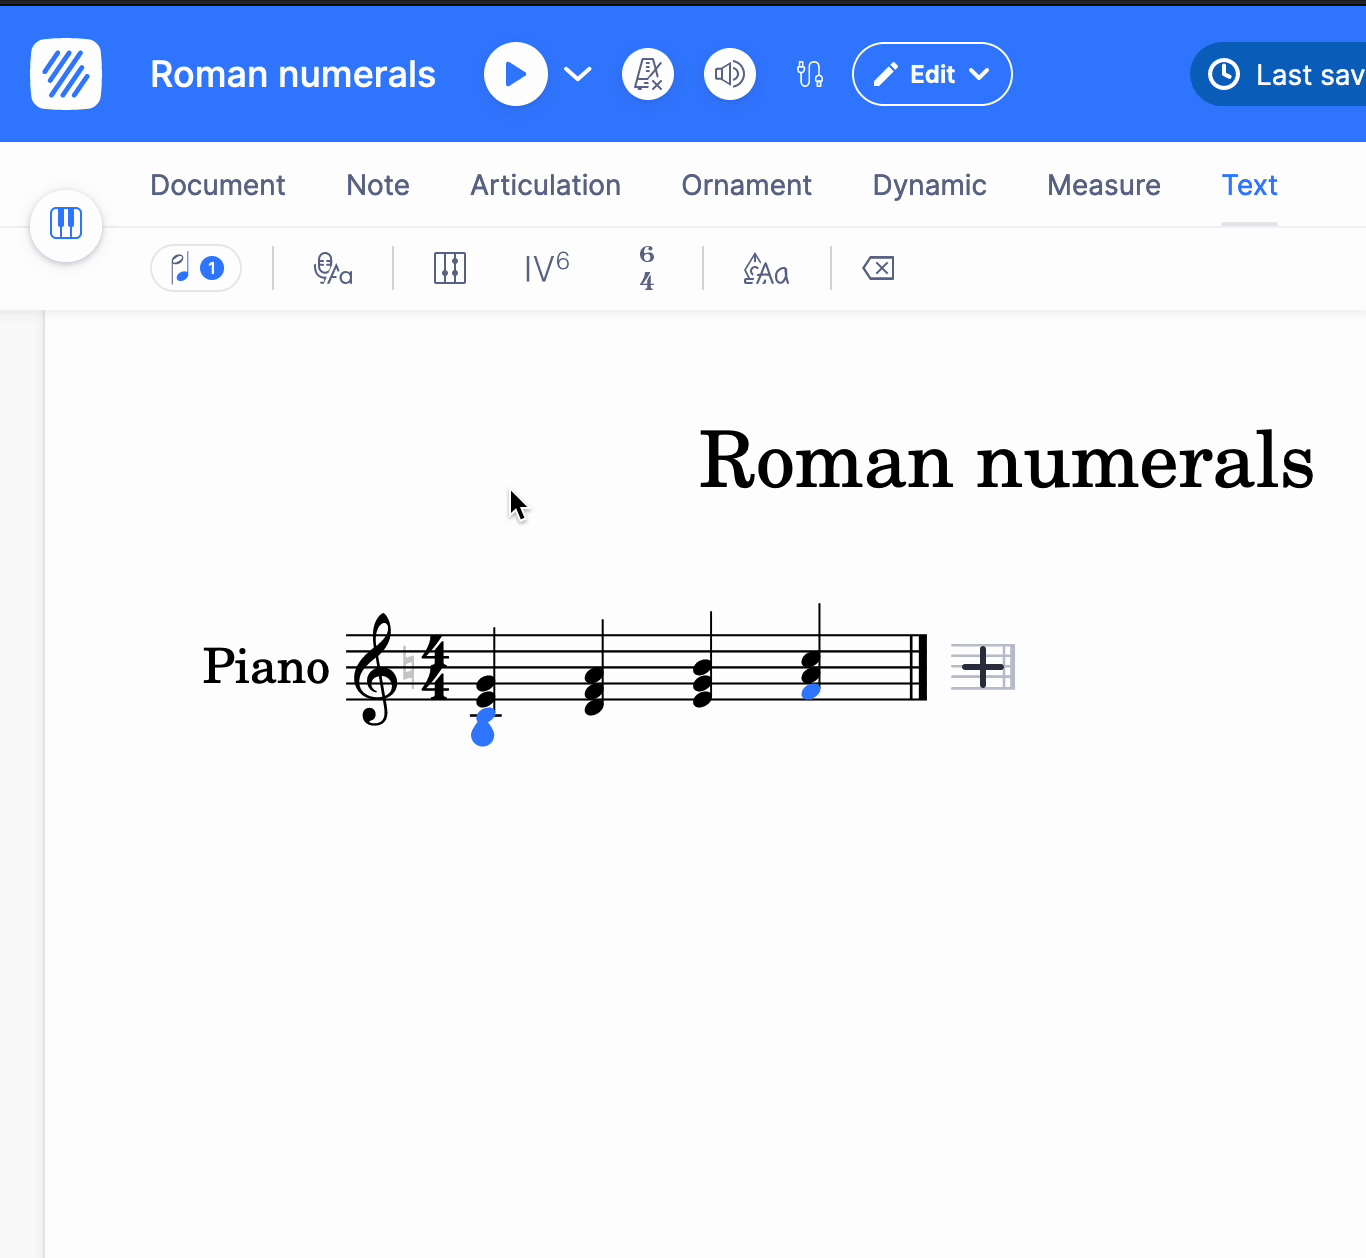 Changing the roman numerals input system